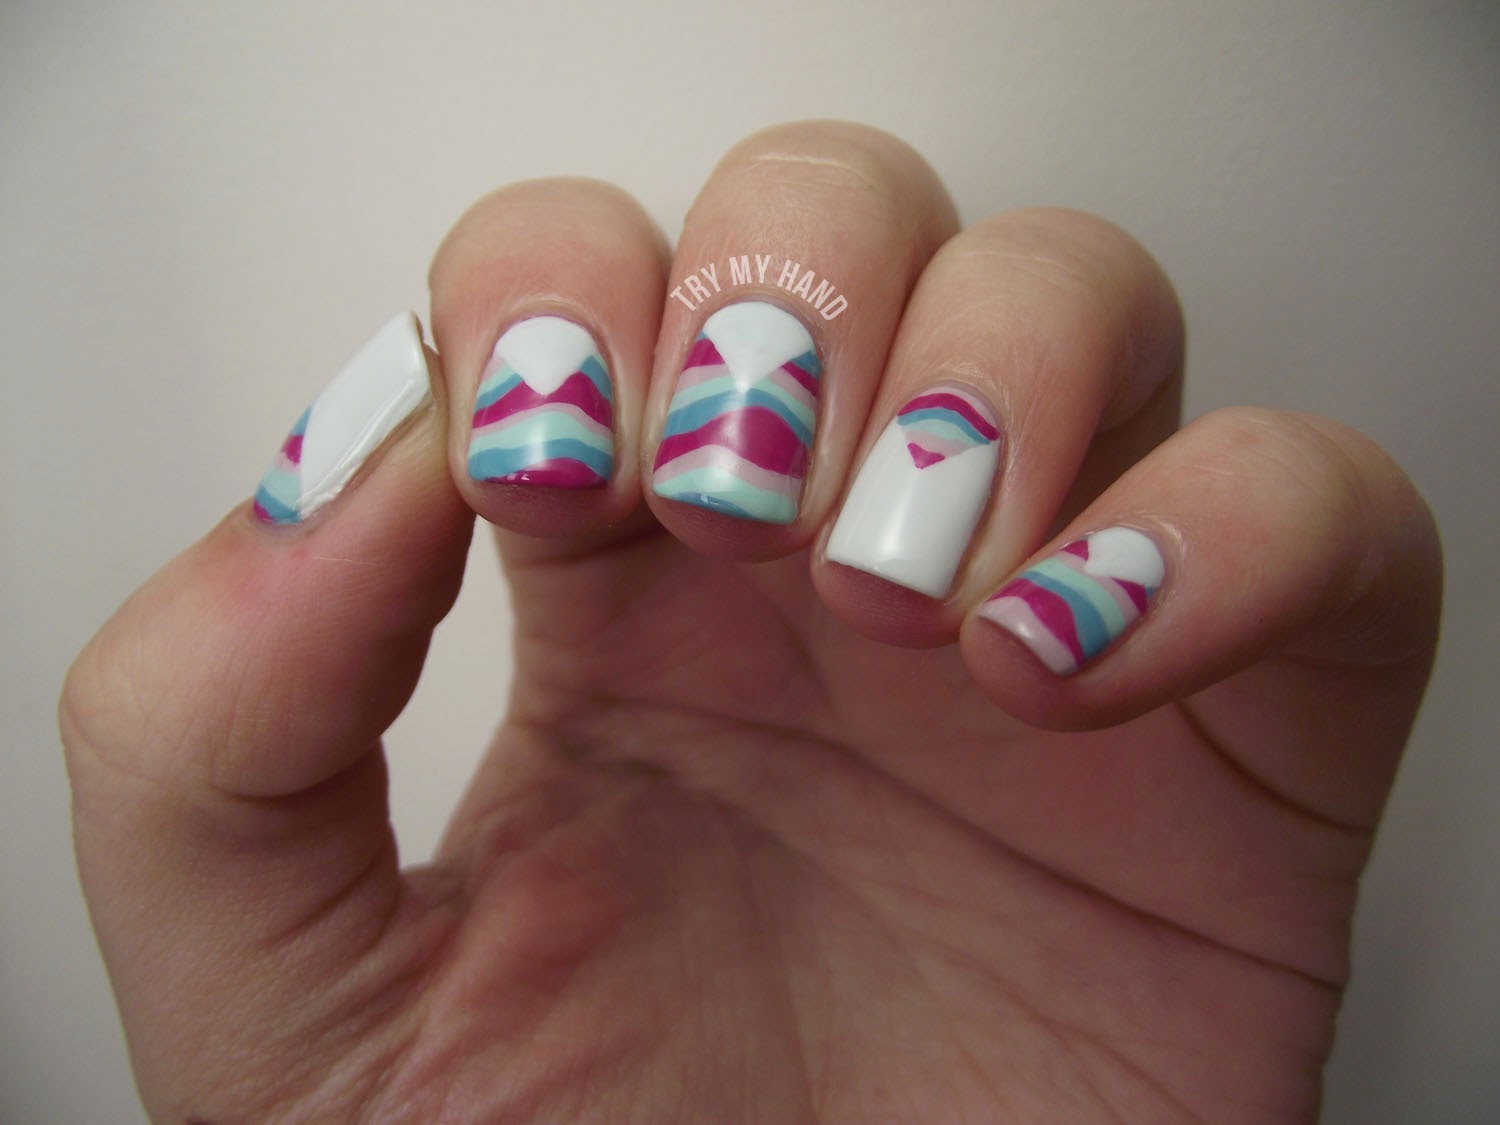 Try My Hand: Tutorial : Triangles (Alphabet Nail Art Challenge)